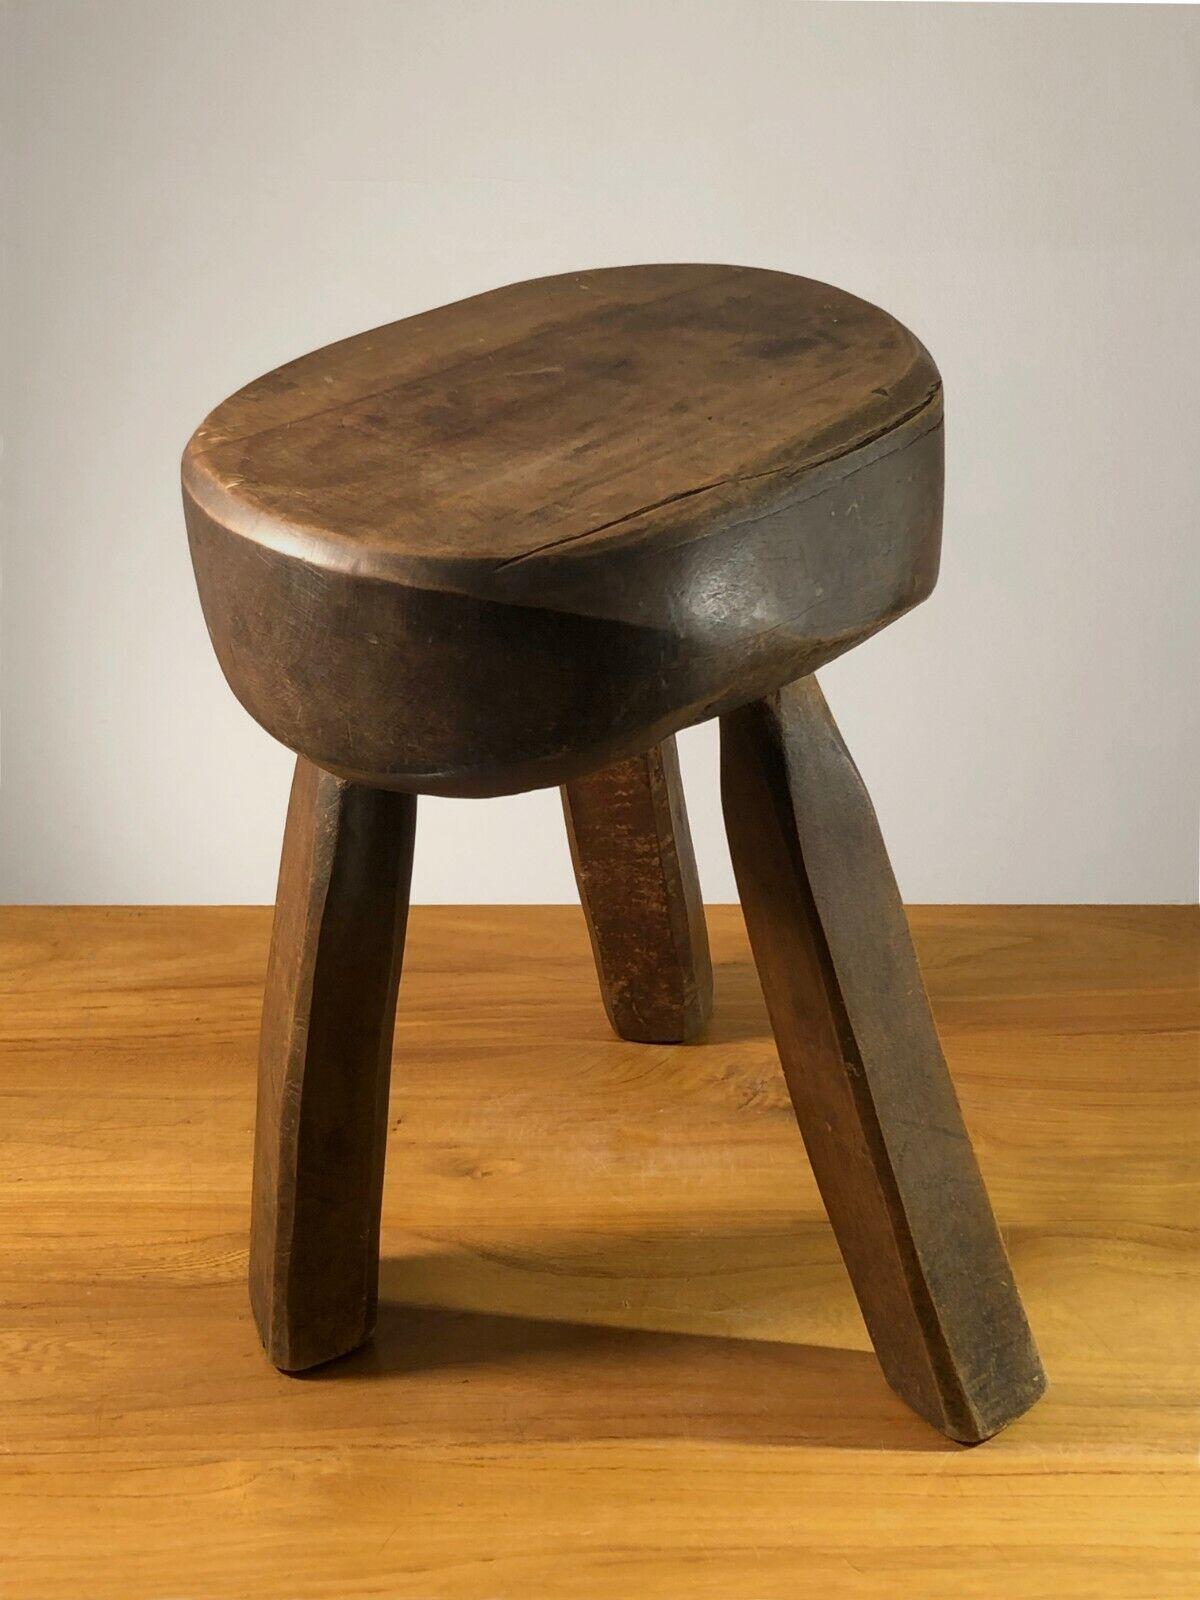 Wood A BRUTALIST MID-CENTURY-MODERN RUSTIC STOOL, MAROLLES Style, France 1950 For Sale